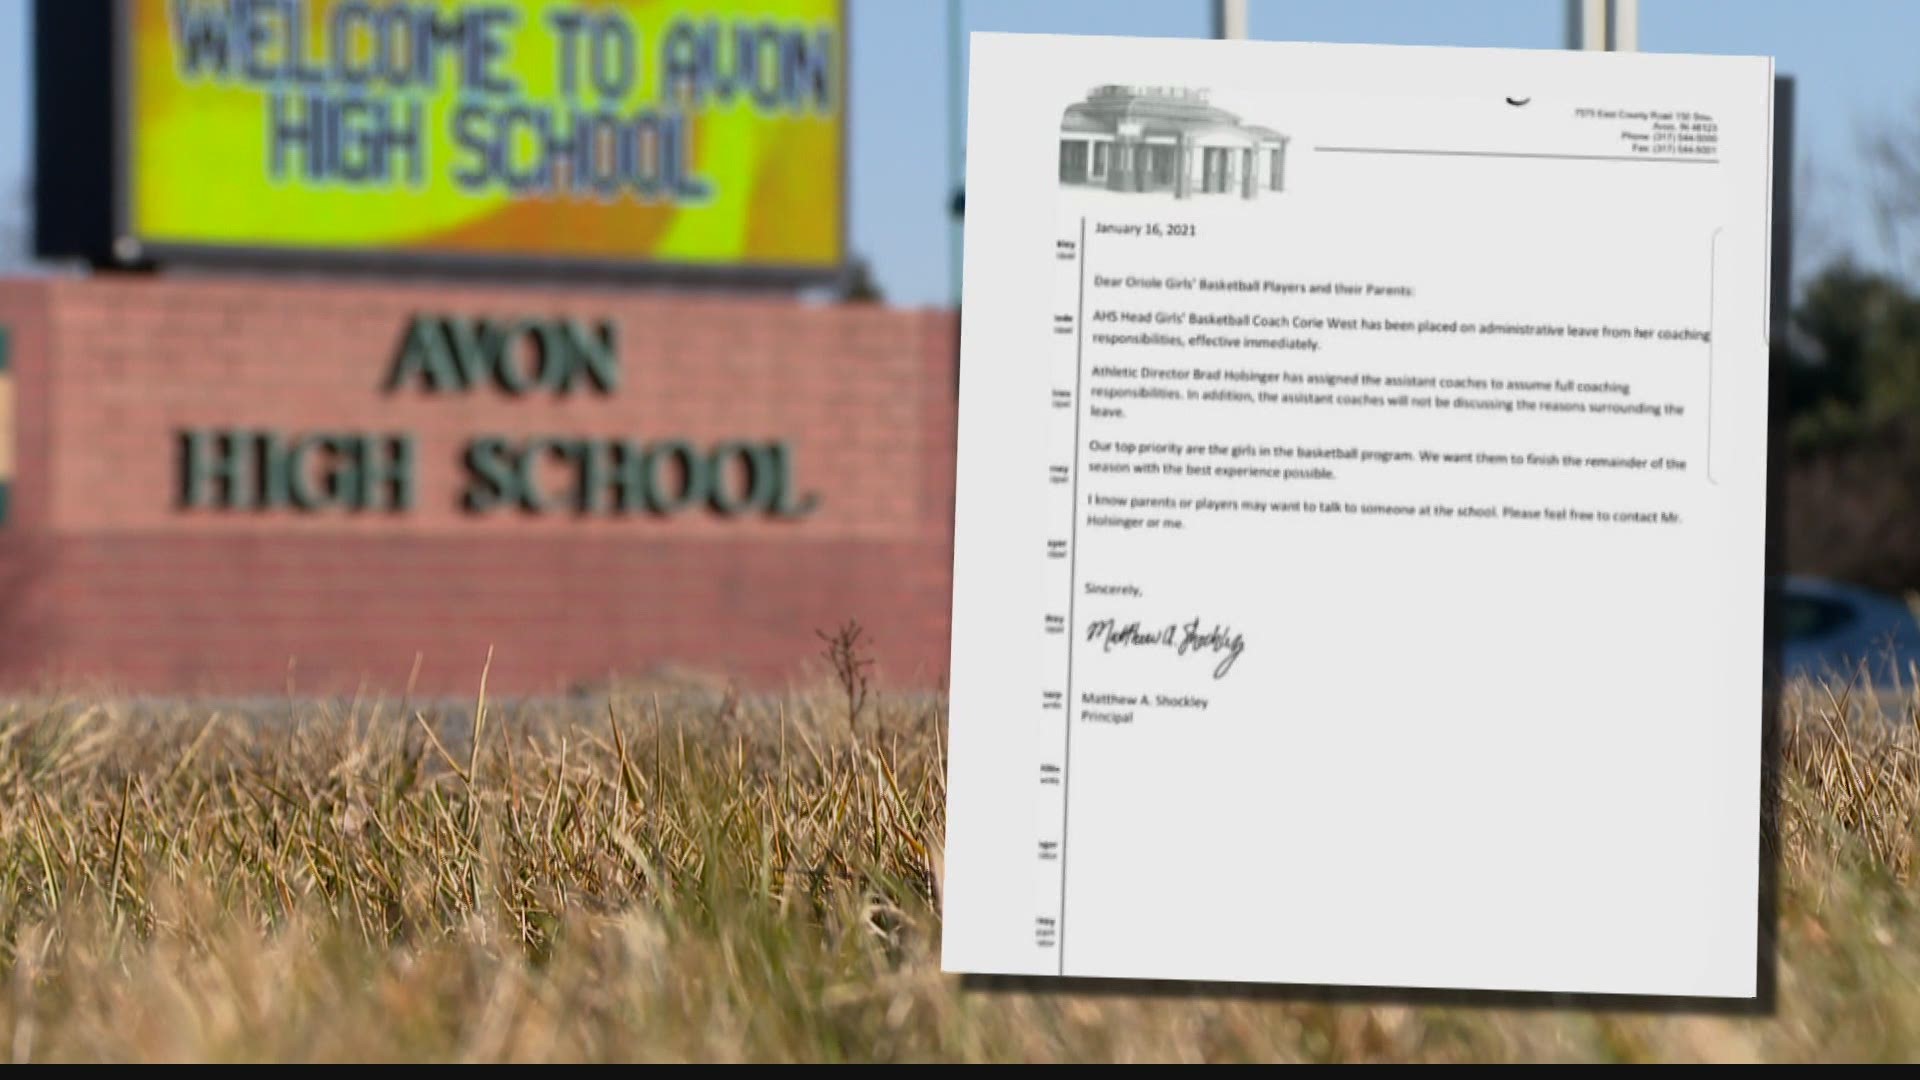 Some Avon parents claim mistreatment of players by a basketball coach.